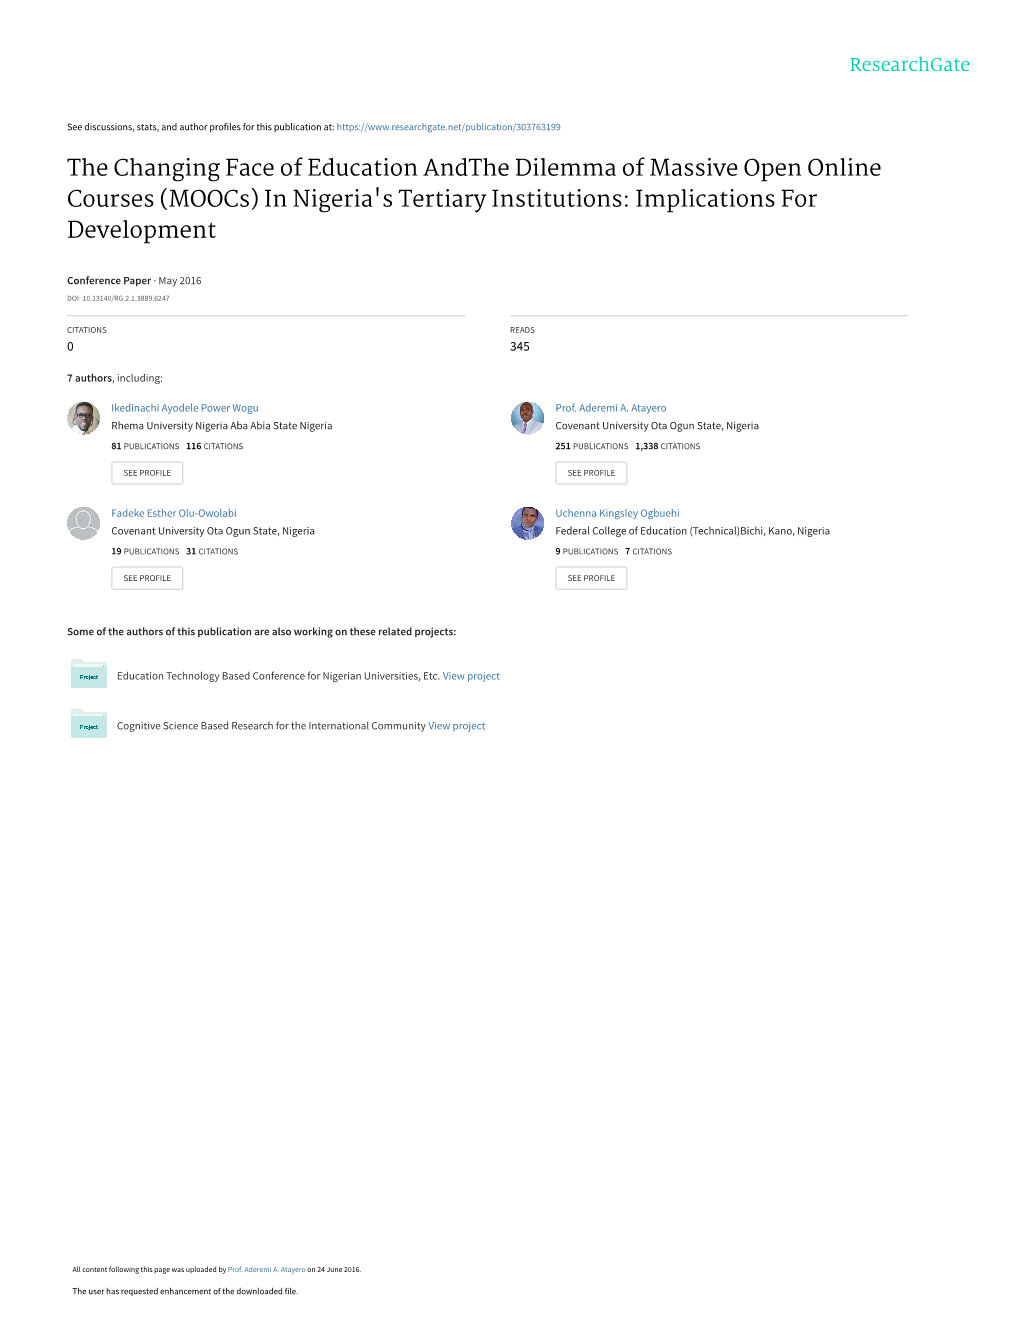 (Moocs) in Nigeria's Tertiary Institutions: Implications for Development